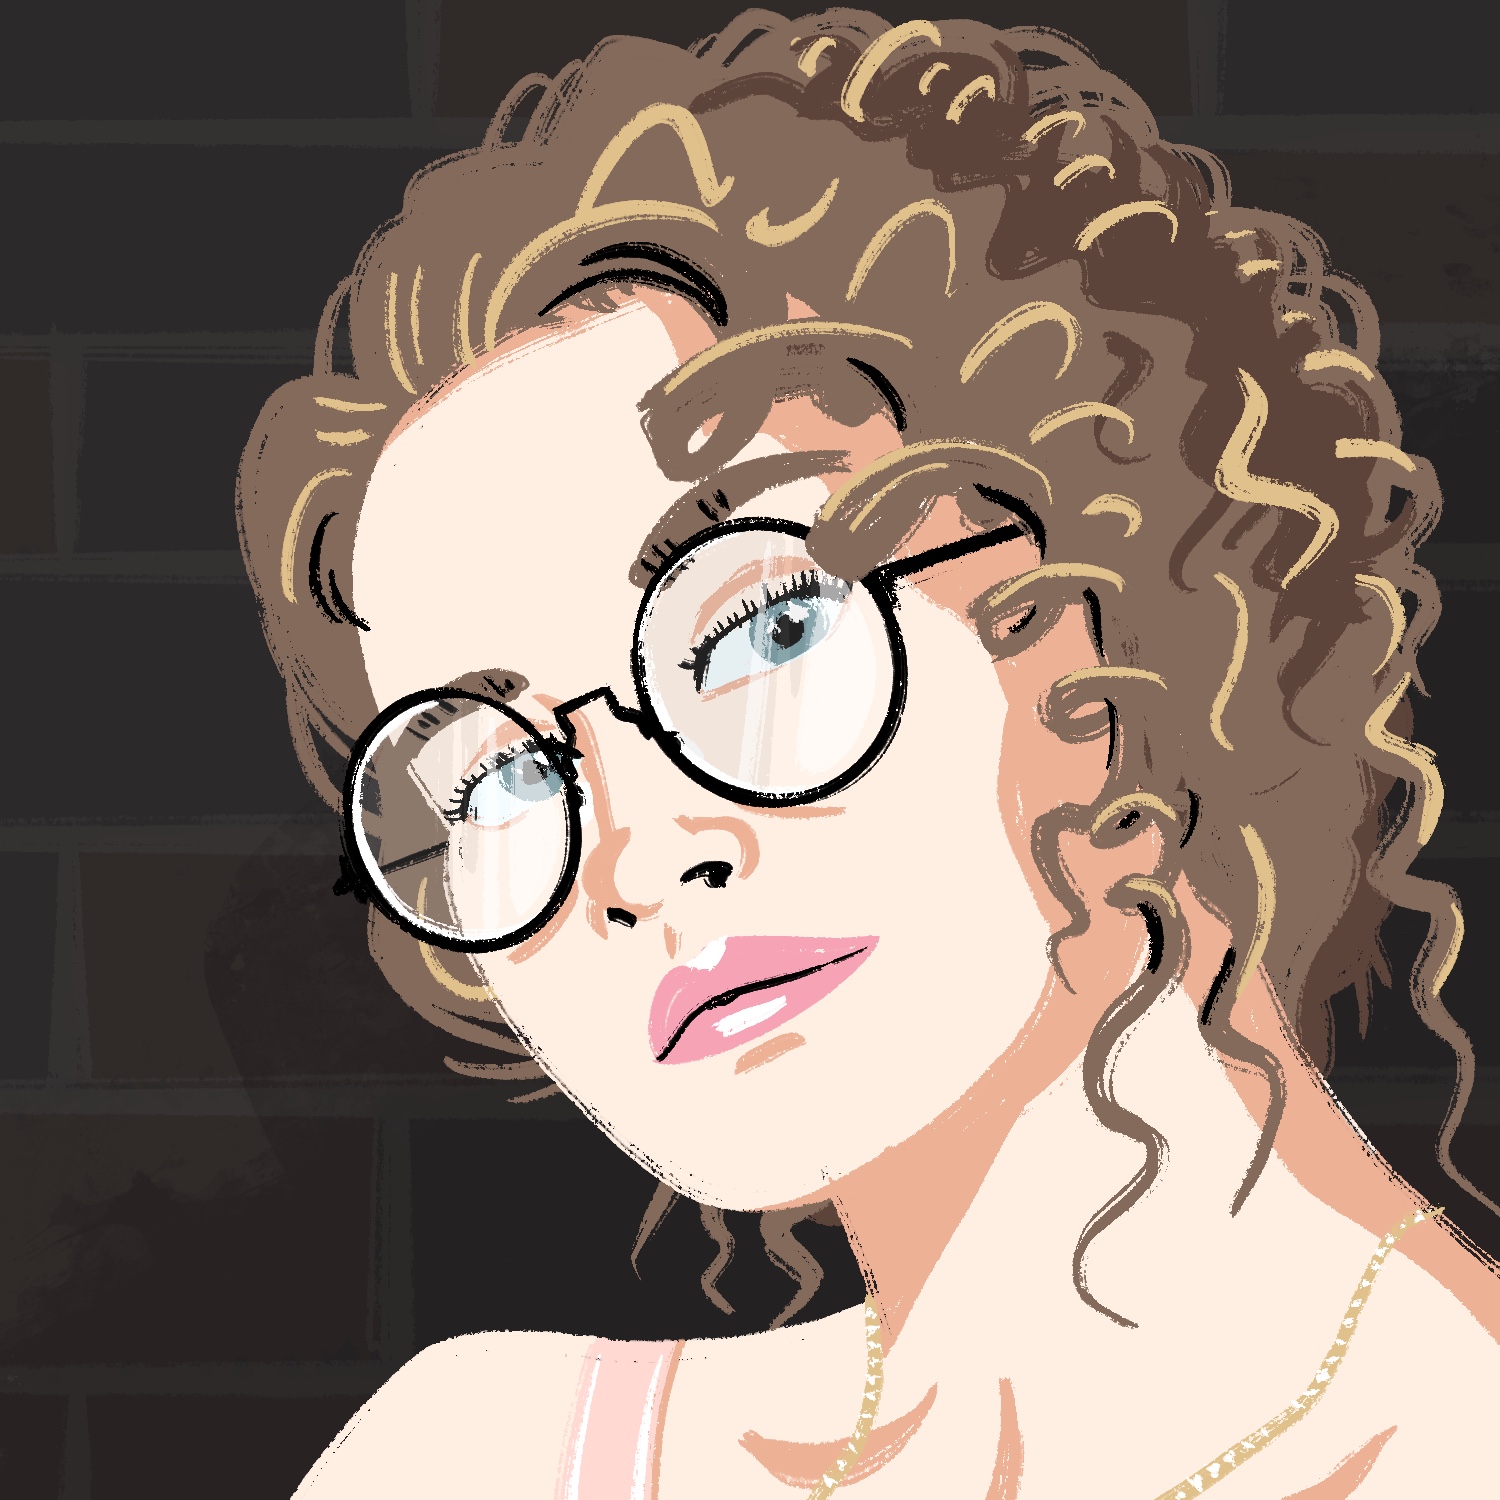 An illustration of a woman looking slightly sideways at the viewer, with her head turned and tilted a bit. She has a pale complexion, pink lipstick, blue eyes, and large glasses with round lenses. Her hair is brown and very curly. It is put up in the back, but many curls are falling down from her forehead over the side of her face.